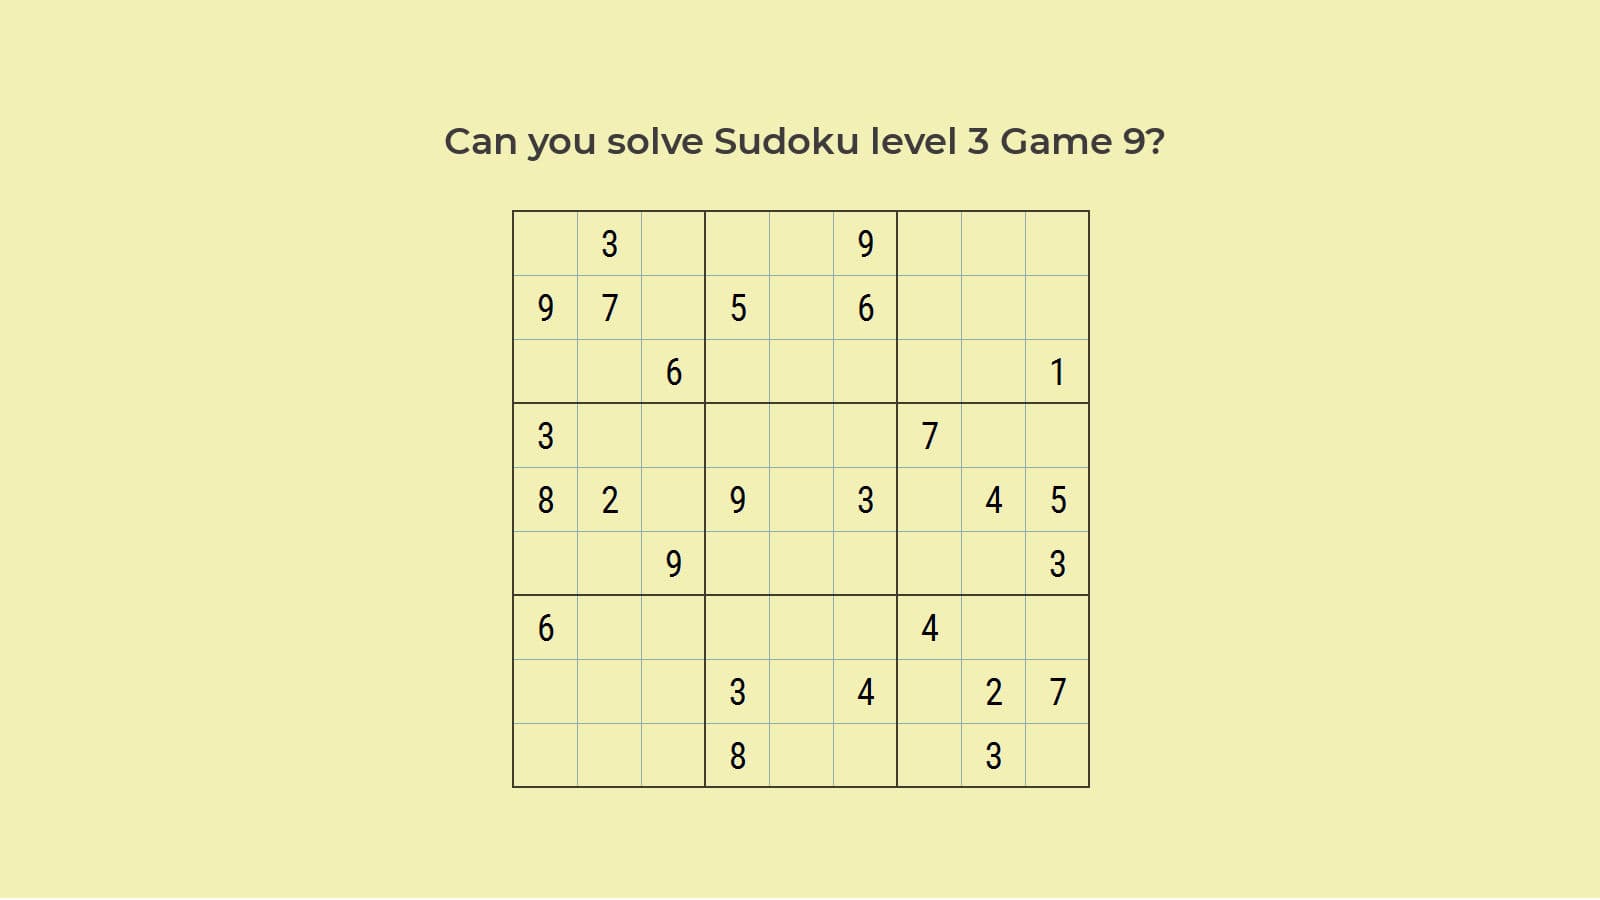 How To Solve Hard Sudoku Level 3 Game 9 Quickly